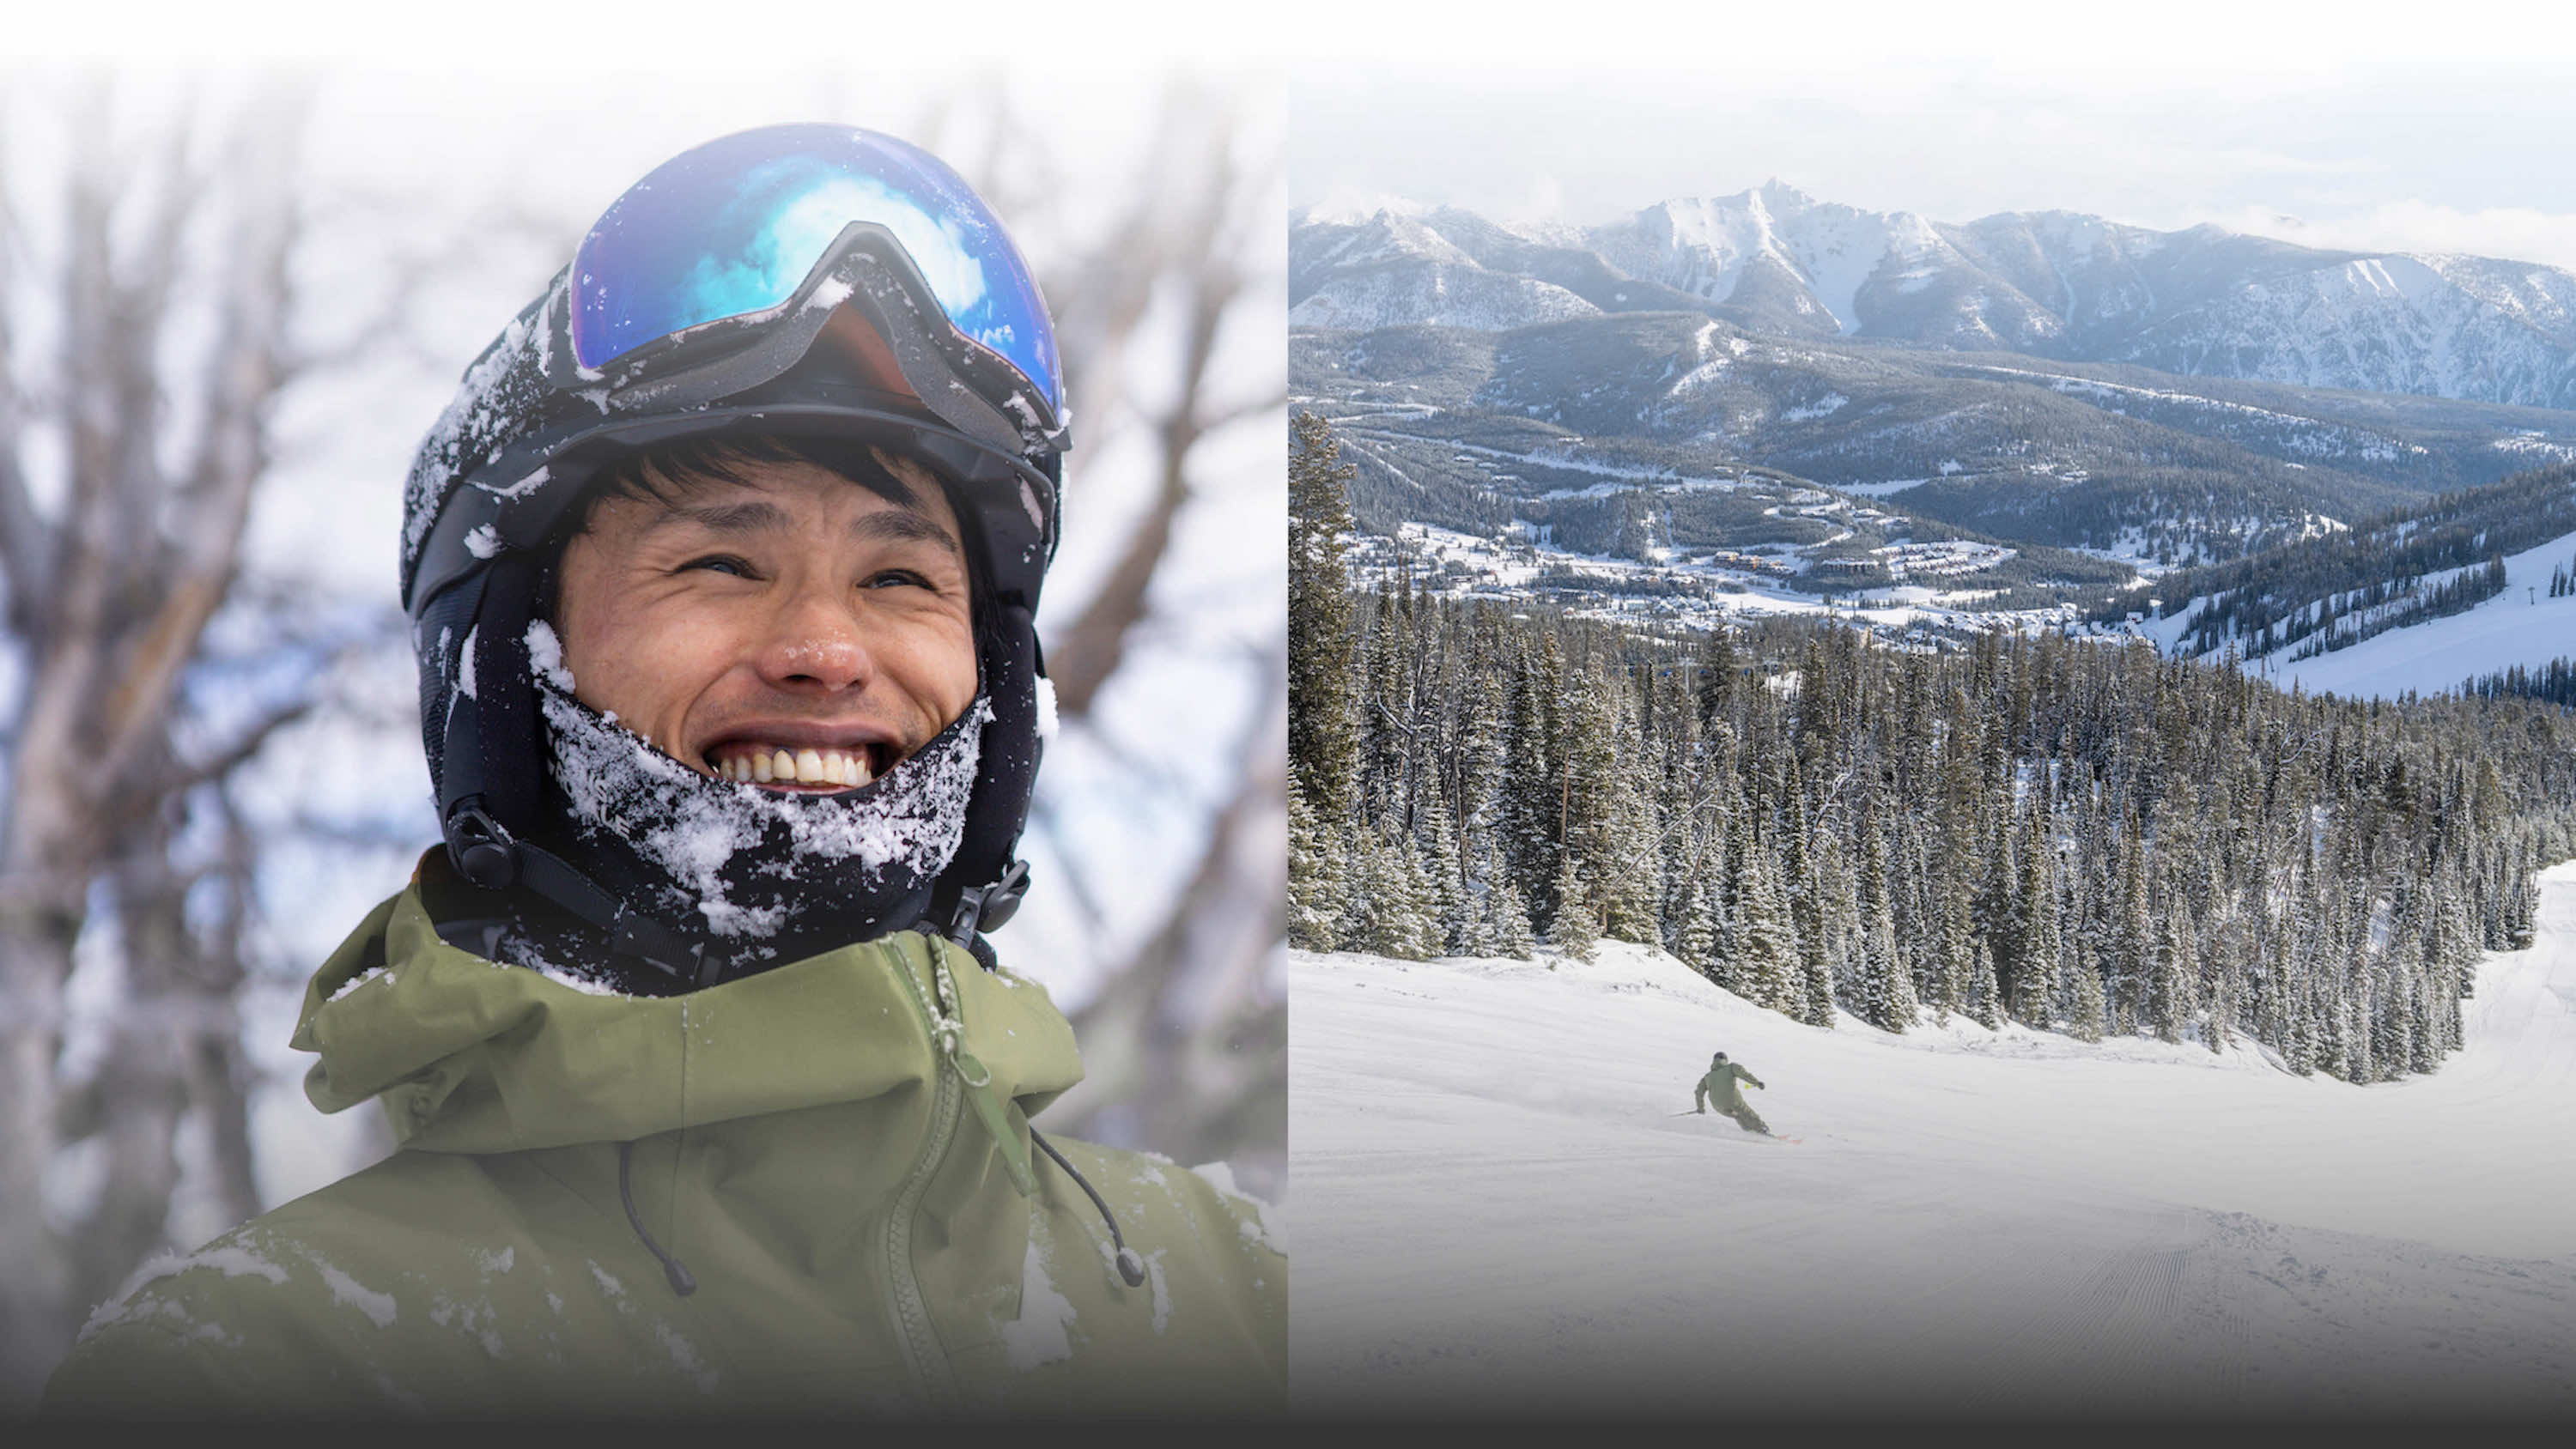 Side-by-side images of a man smiling in ski gear and the man skiing on a groomed ski run at Big Sky Resort